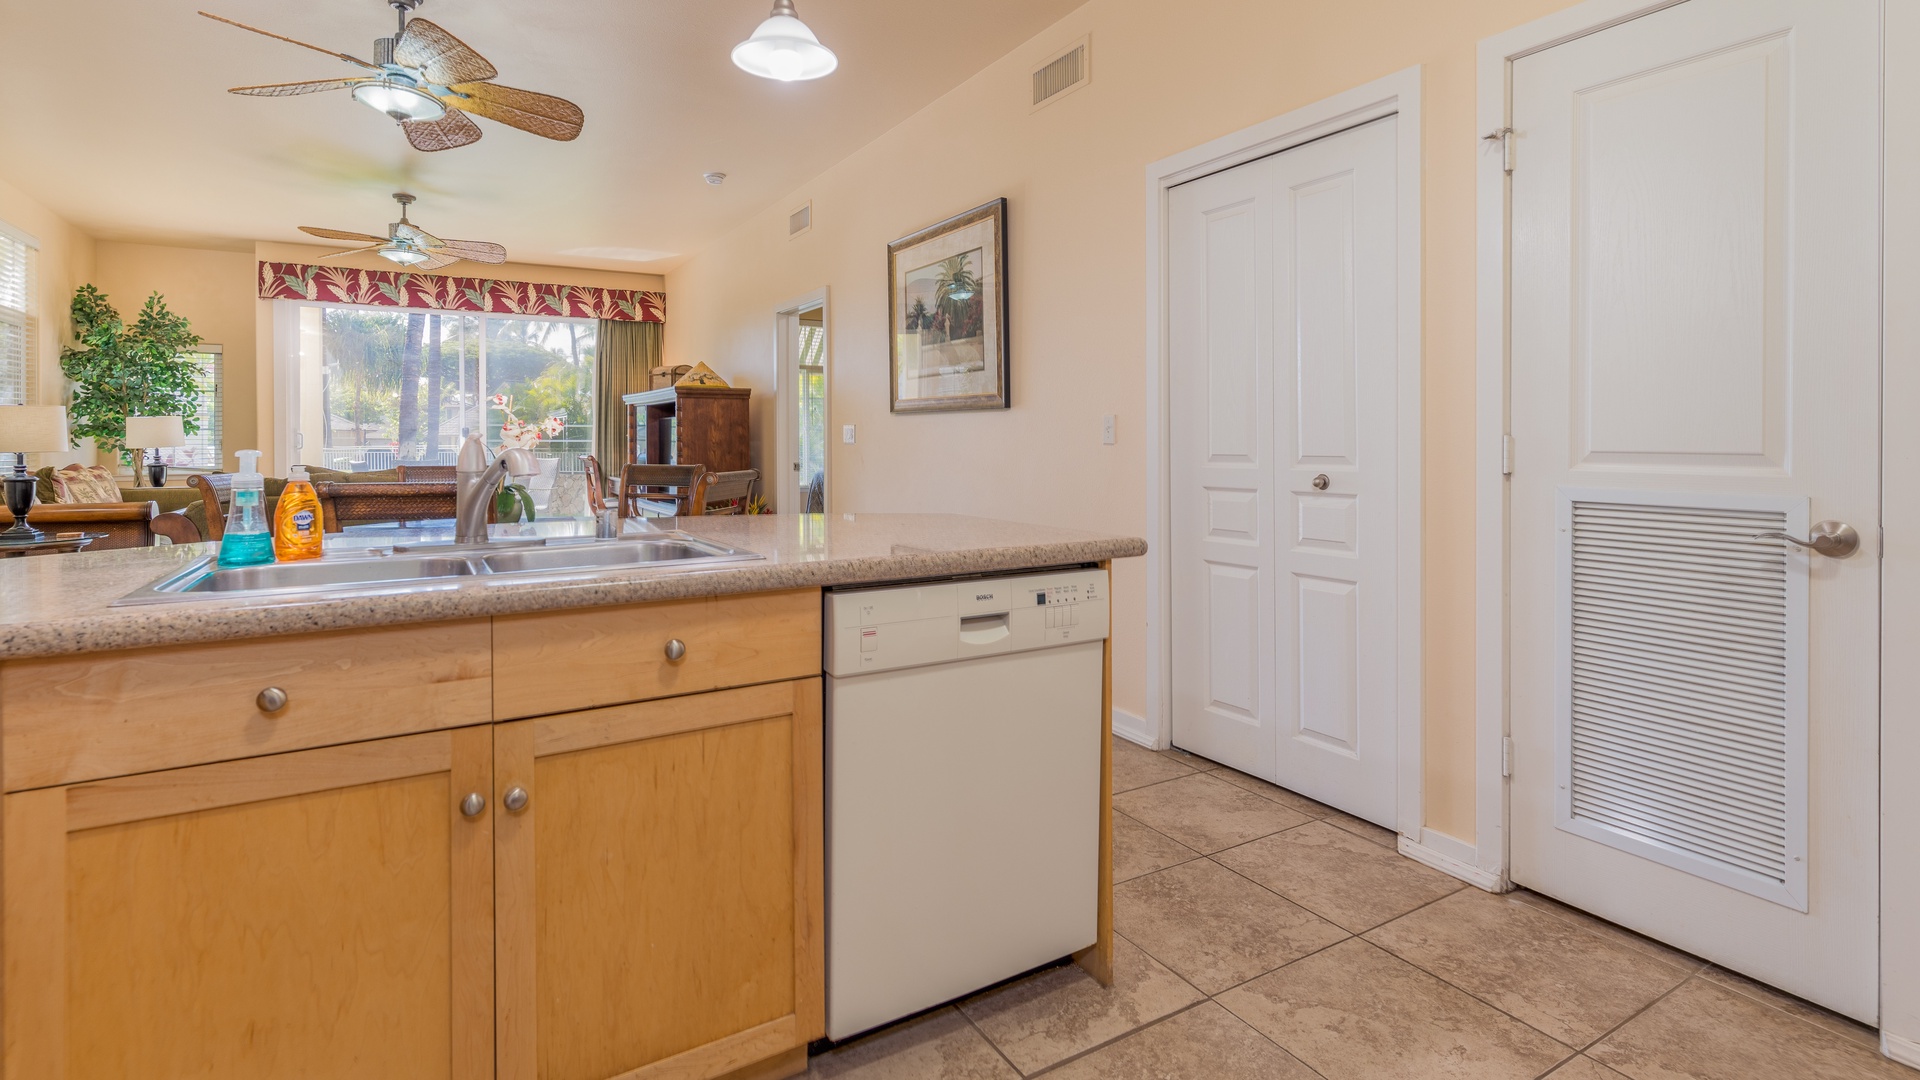 Kapolei Vacation Rentals, Kai Lani 8B - Expansive space includes the kitchen, living and dining areas.